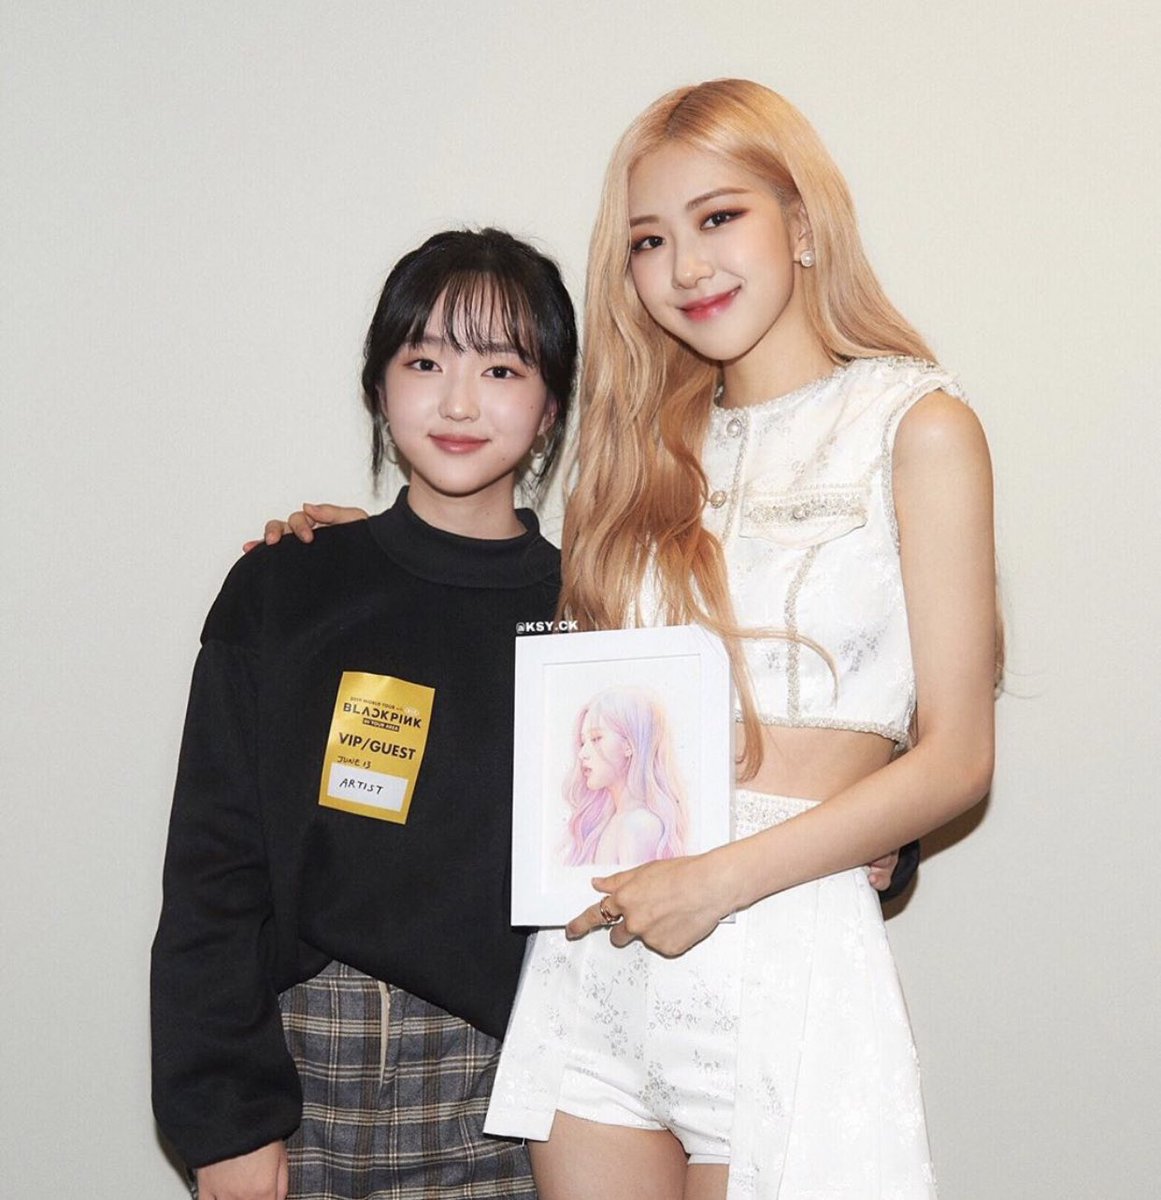  @BLACKPINK's Rosé invited a fan to their concert because she was amazed by her artworks[@/ksy.ck on IG]